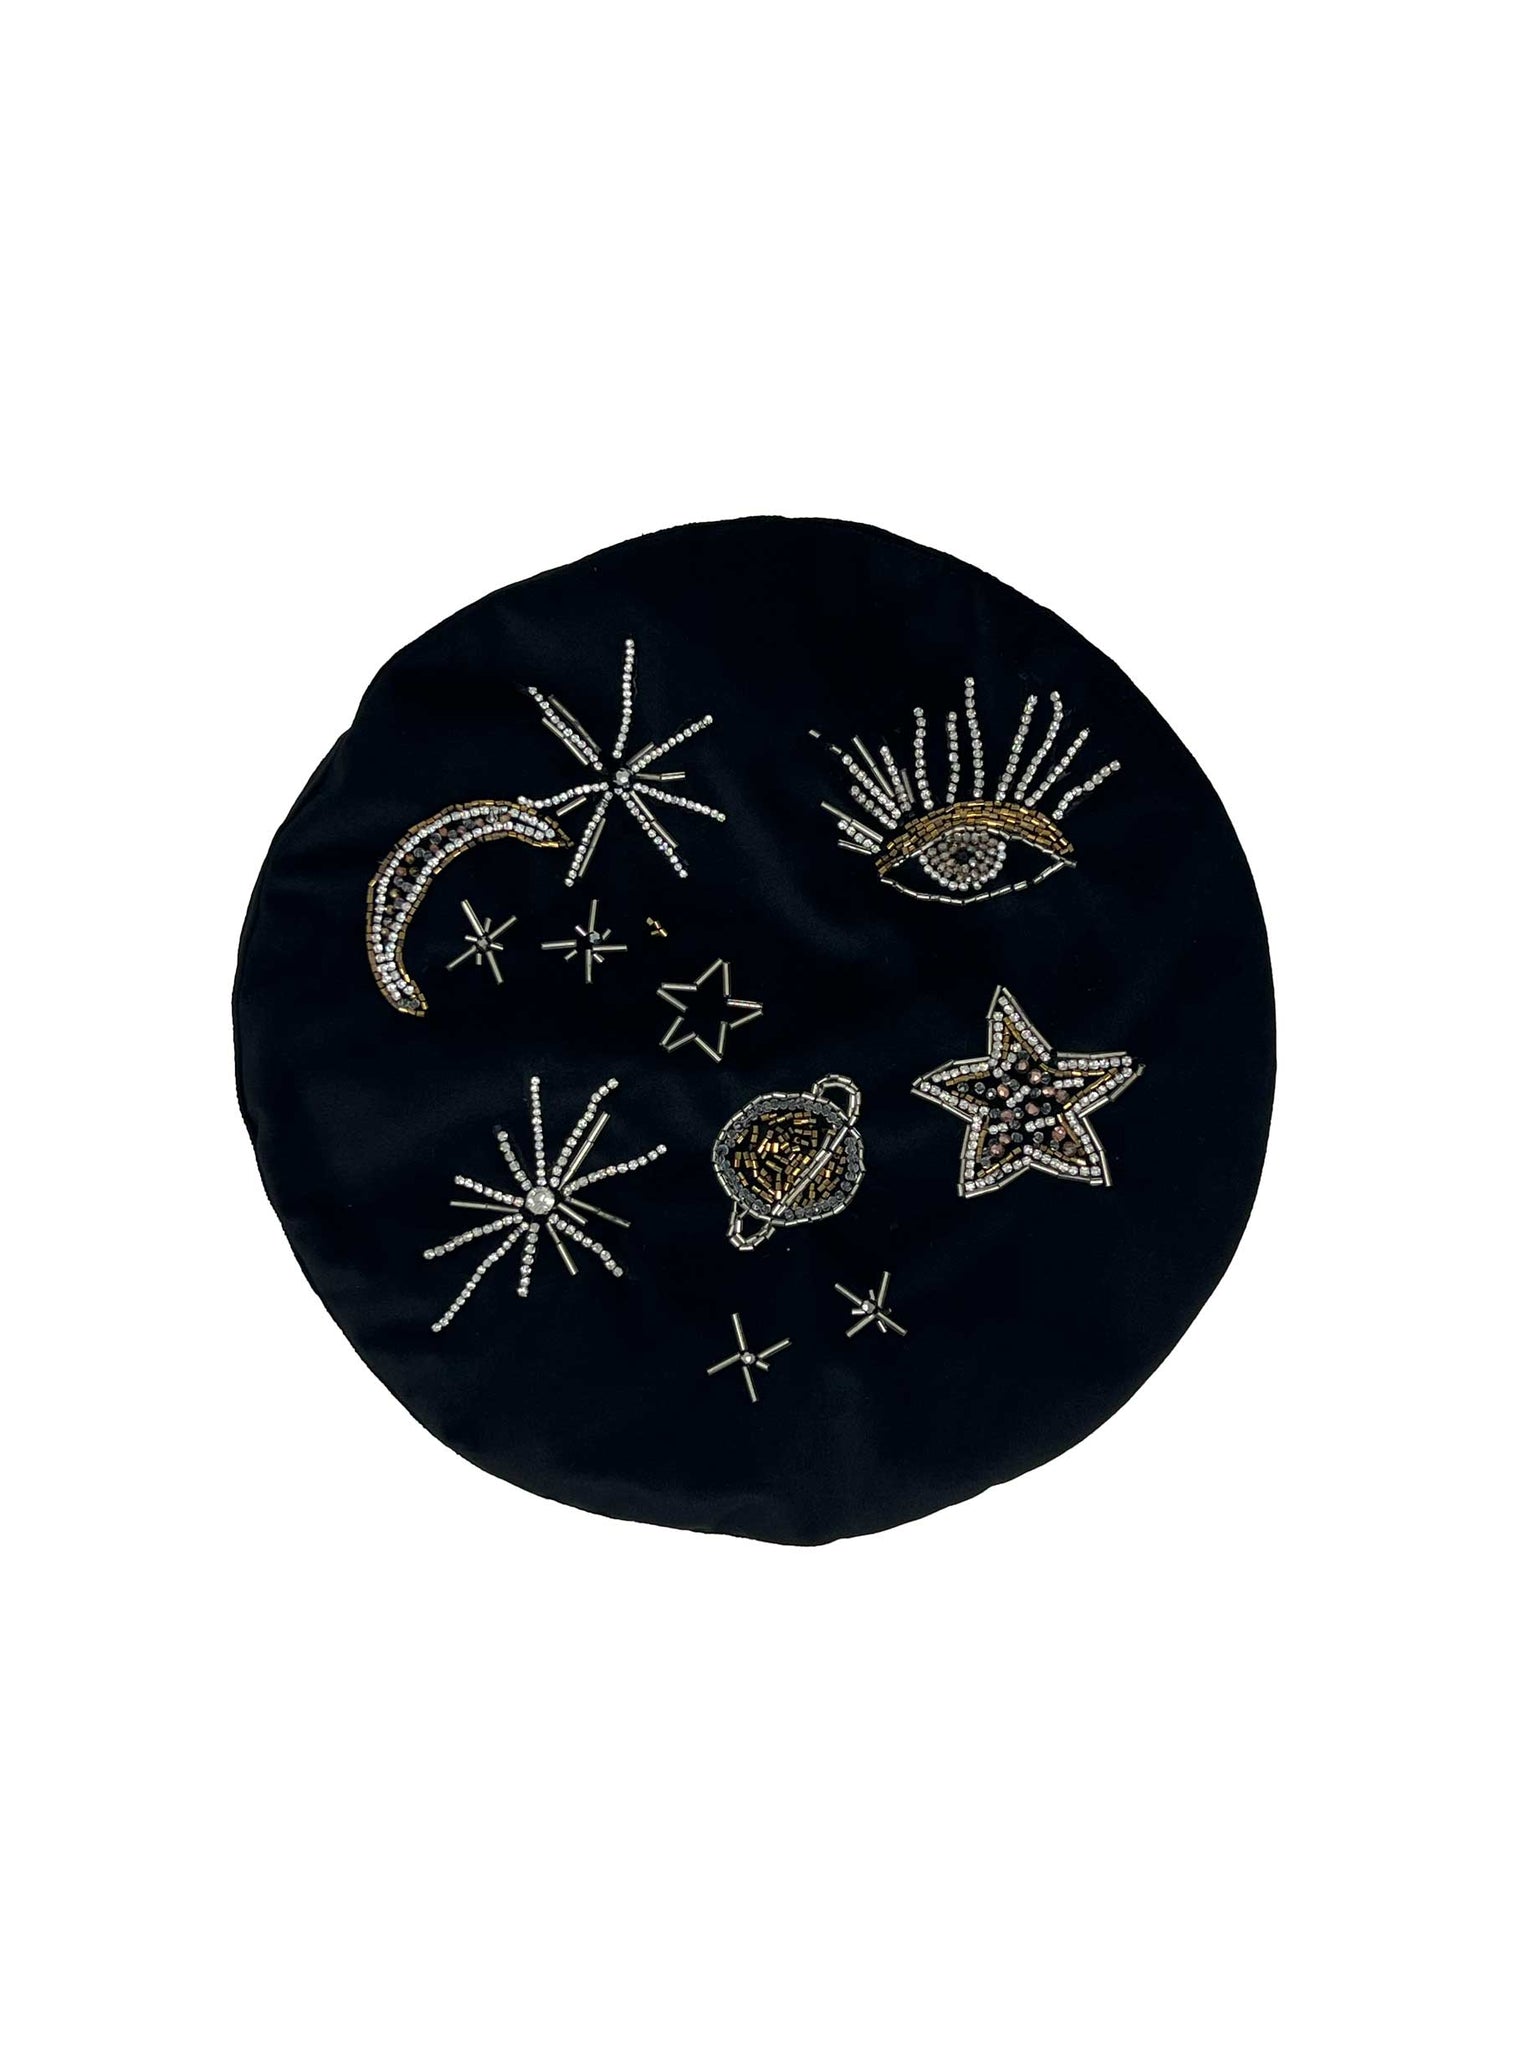 Black velvet embroidered beret with stars and moon "Astra" collection